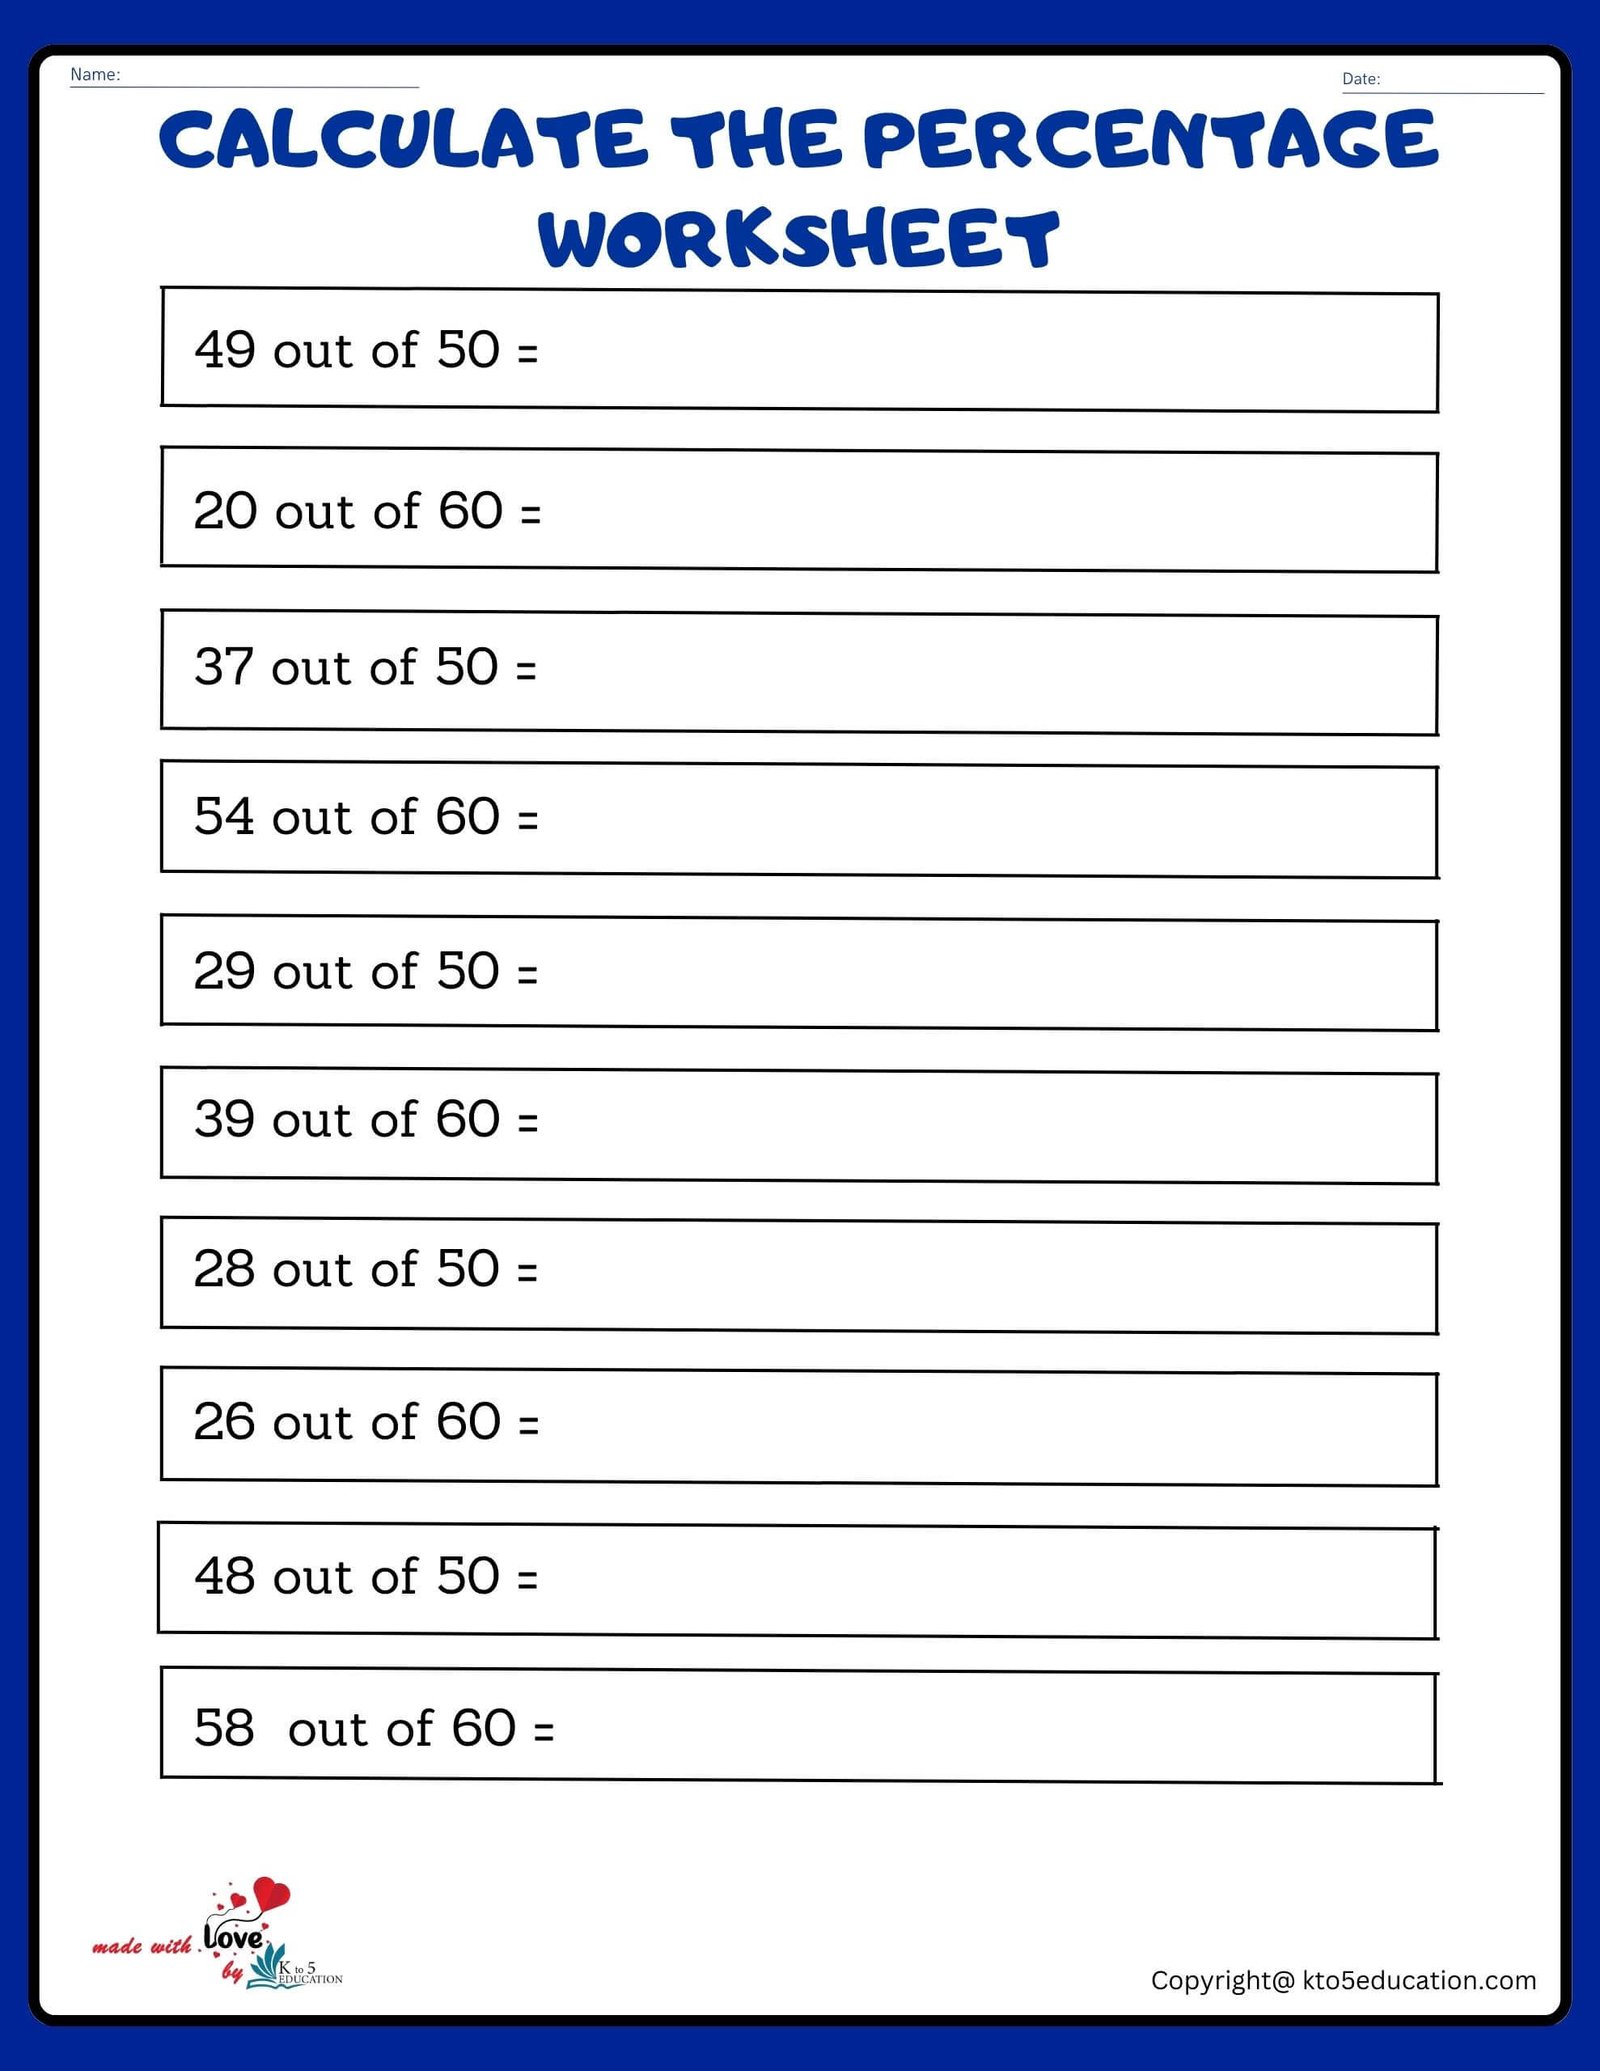 Calculate The Percentage Of 50 To 60 Worksheet